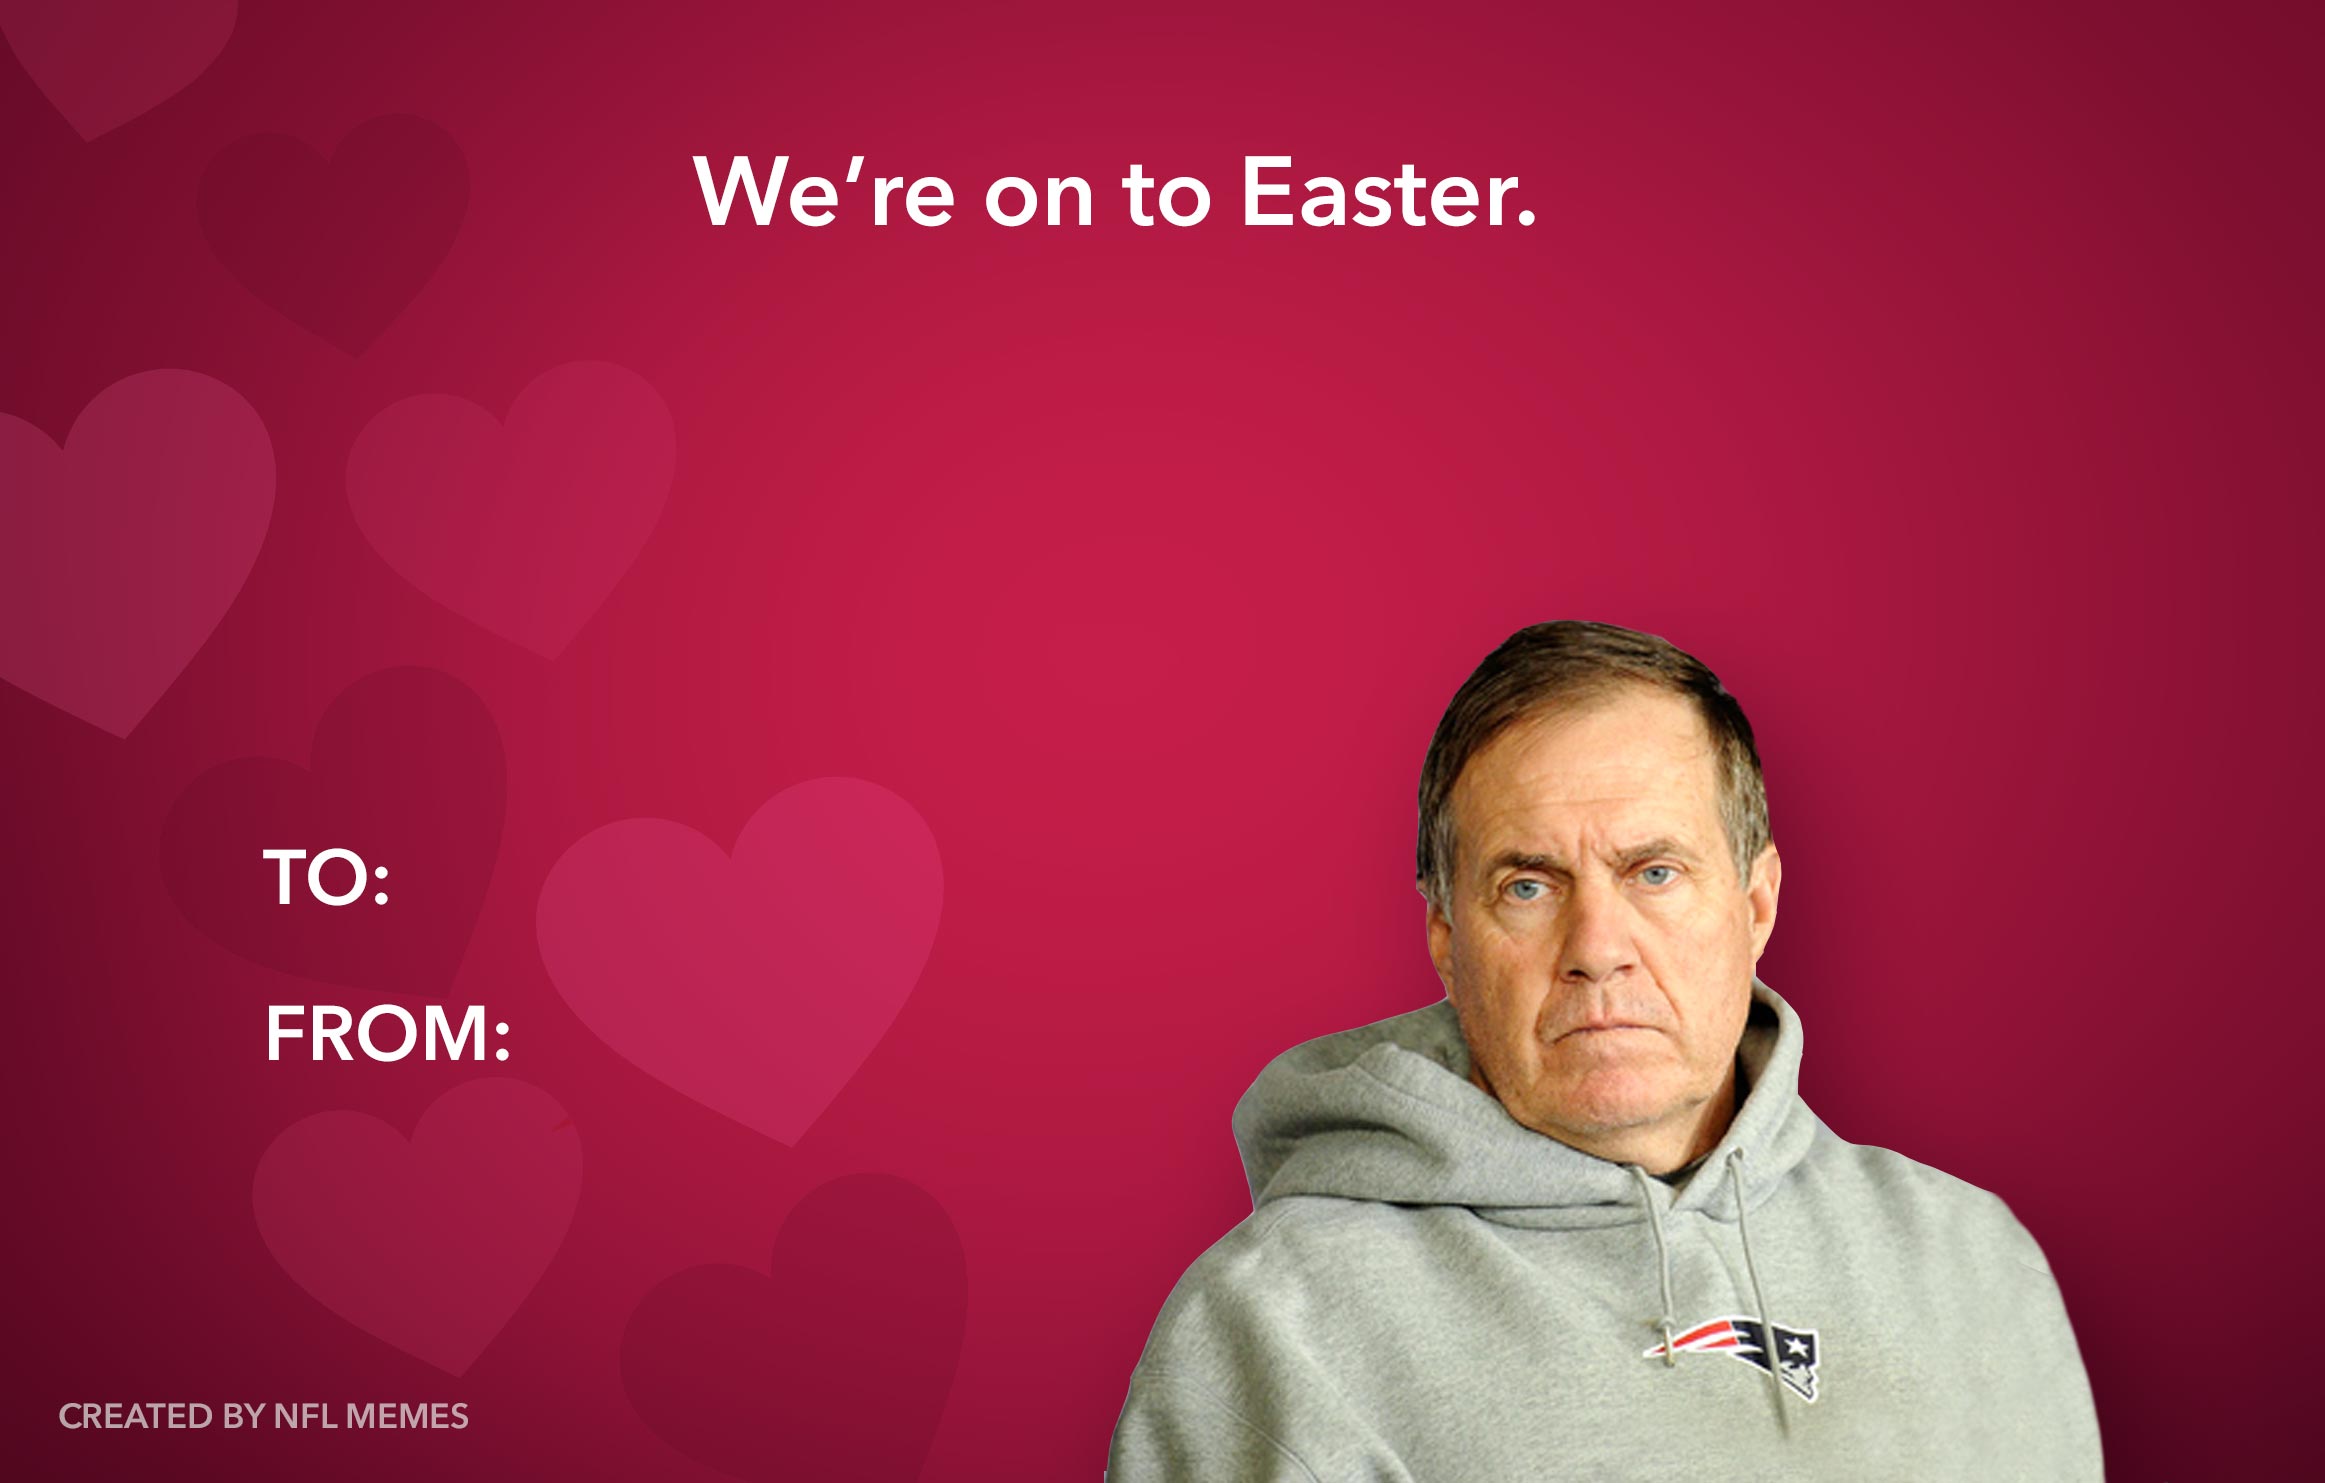 Here’s This Year’s Batch Of Hilarious NFL-Themed Valentine’s Day Cards (PICS)2325 x 1483